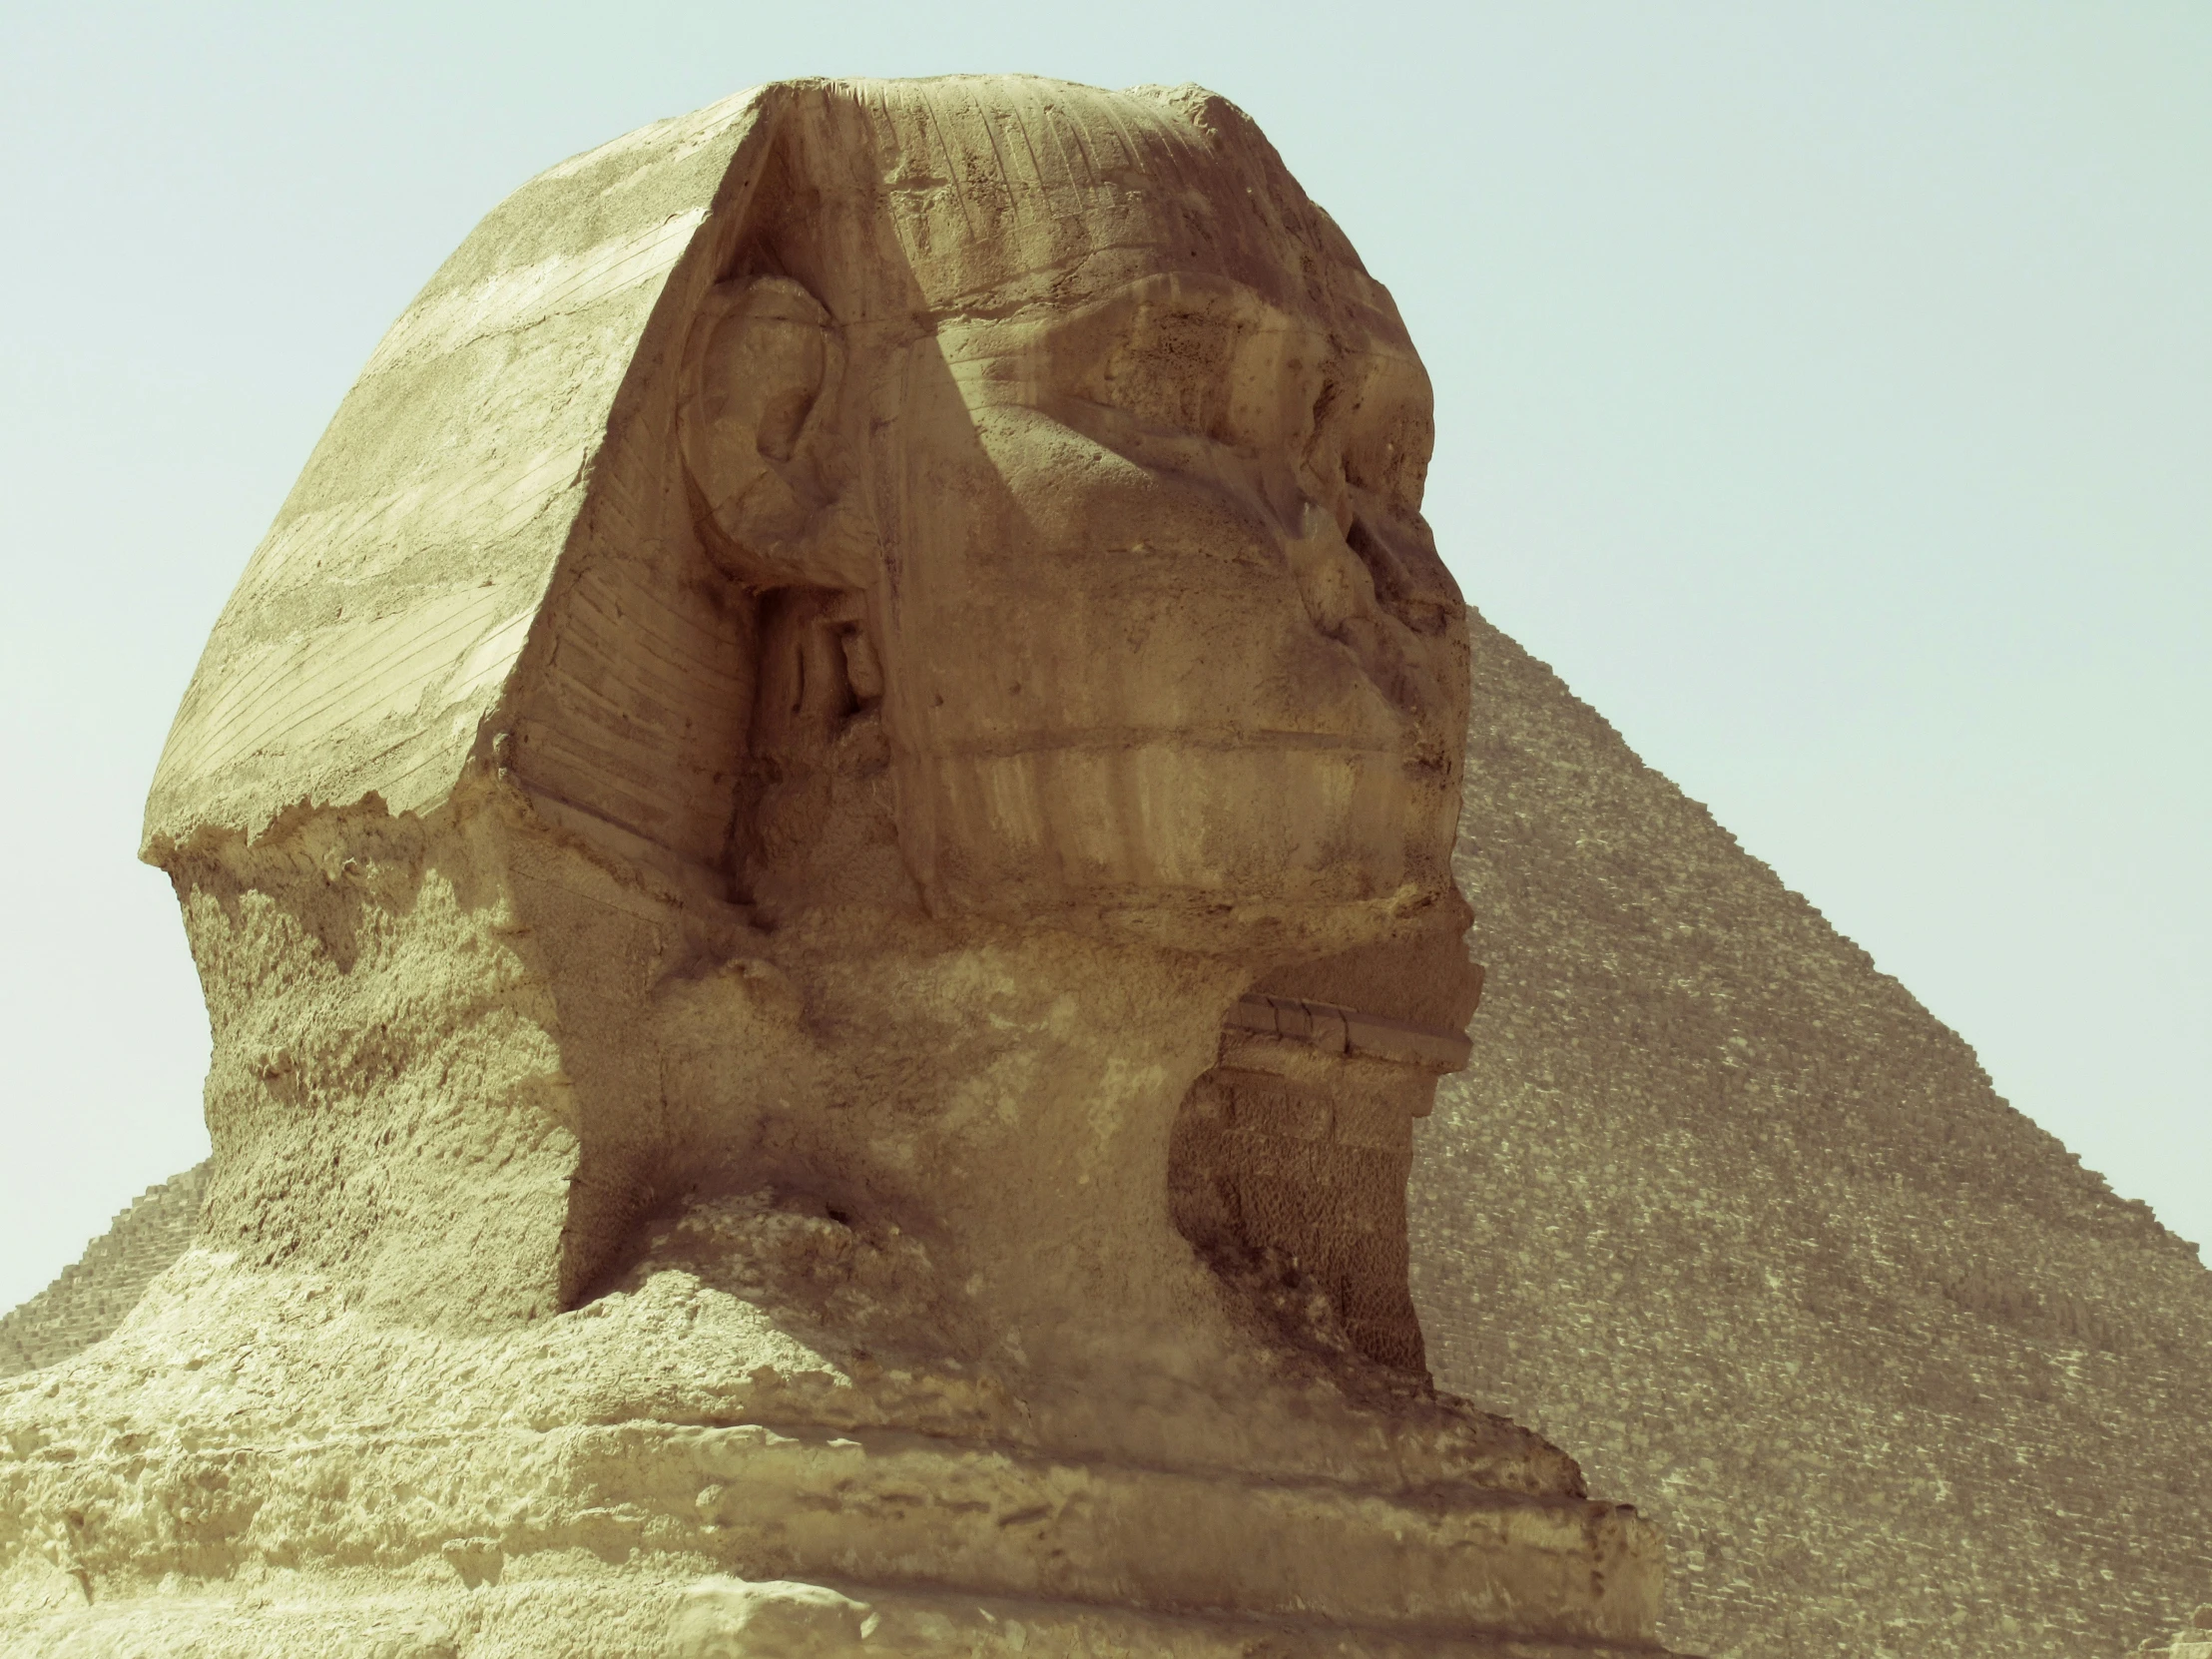 the sphinx with its head turned down is in front of the pyramids